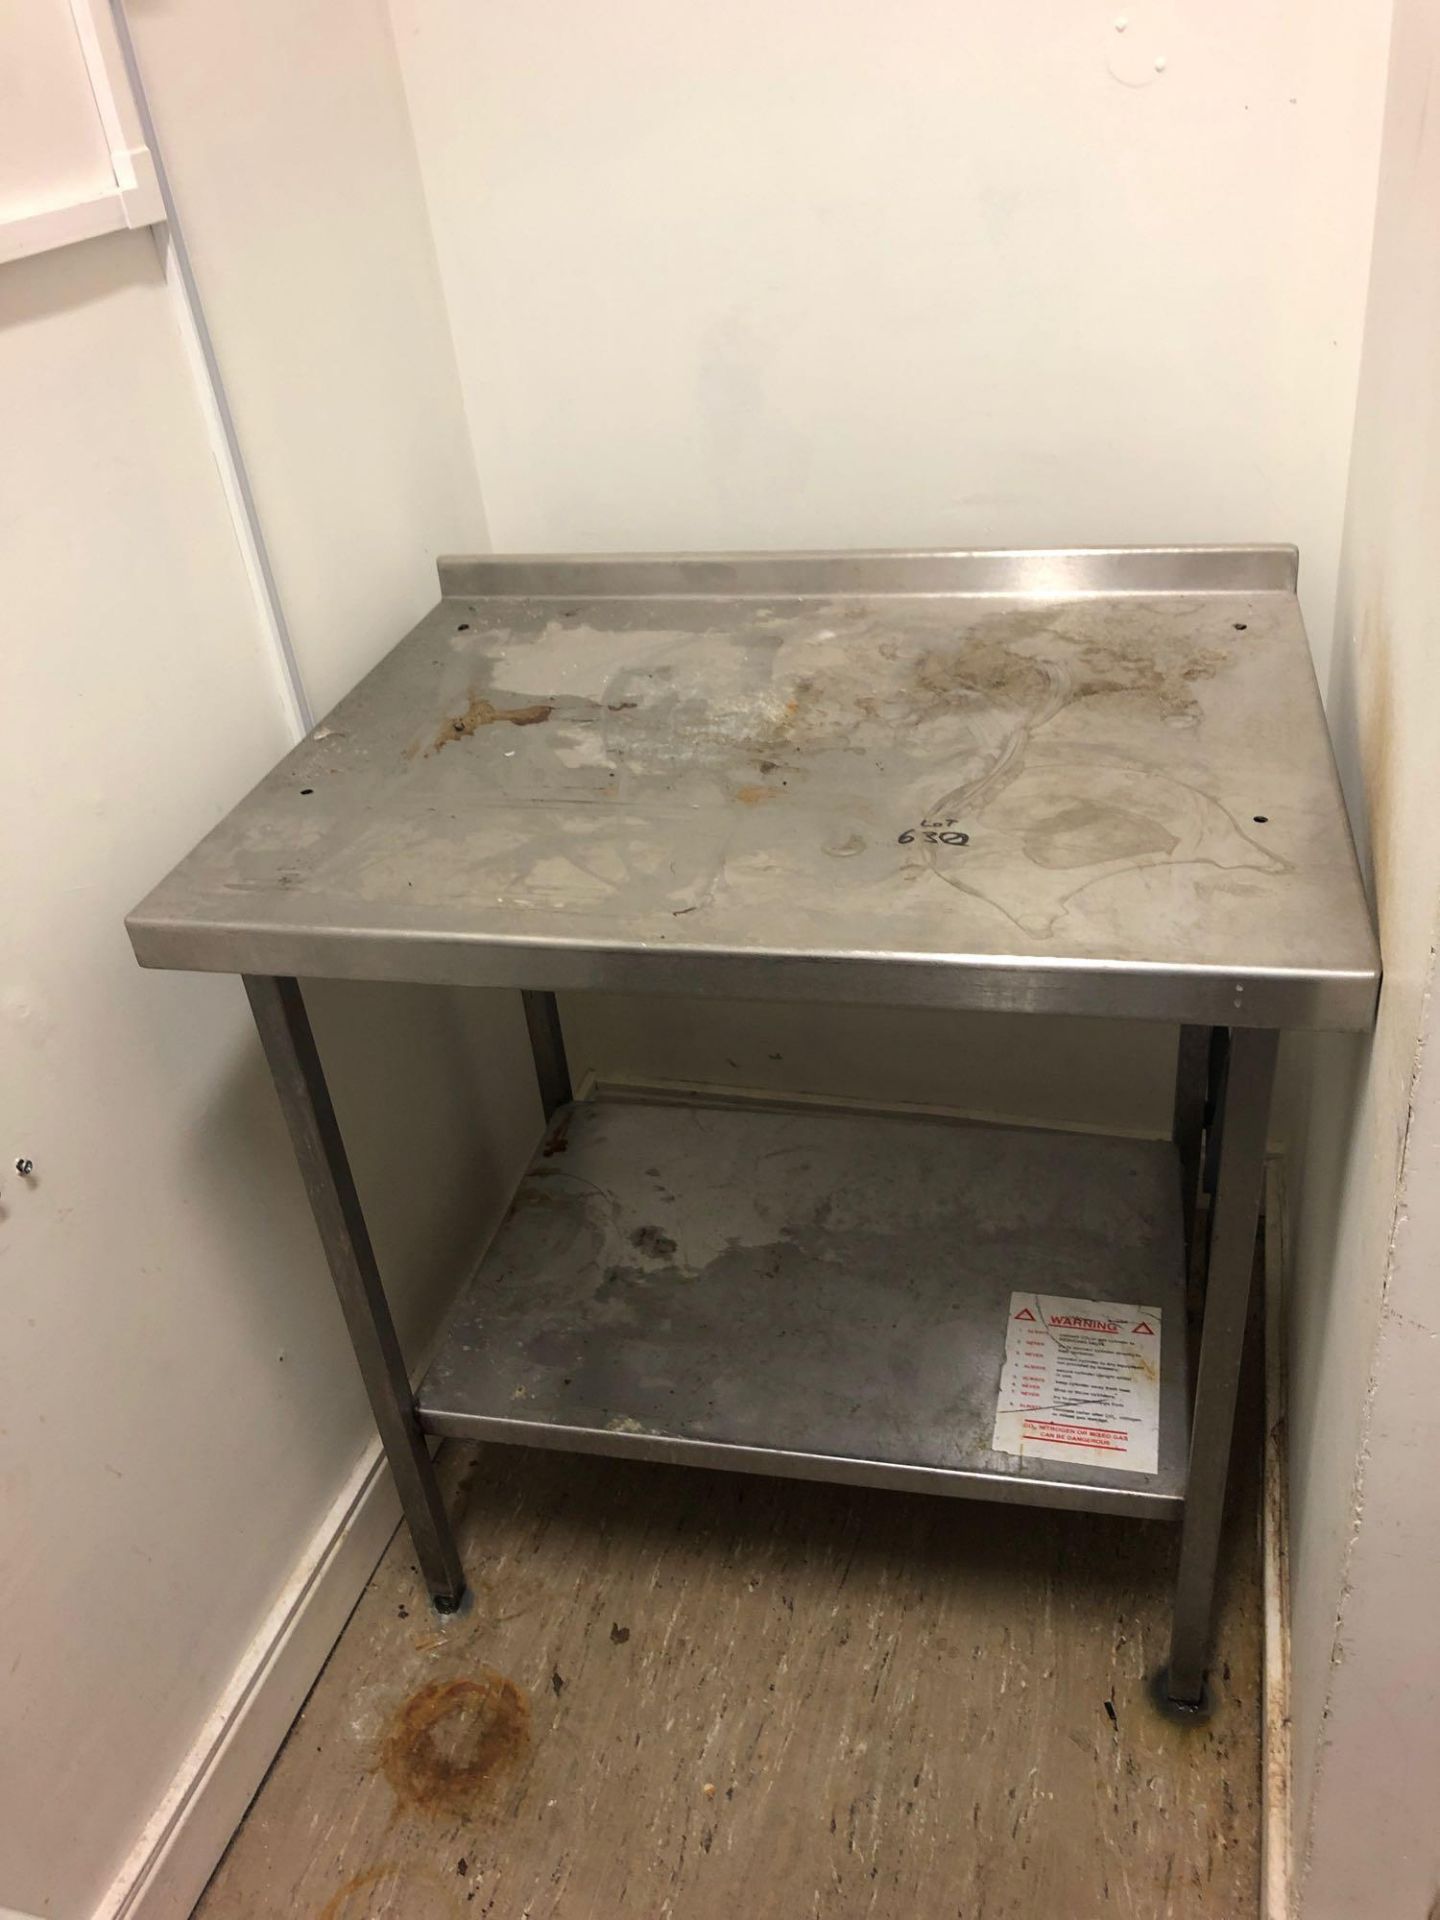 Stainless Steel Preparation Table With Undershelf And Backsplash 900 x 680 Mm